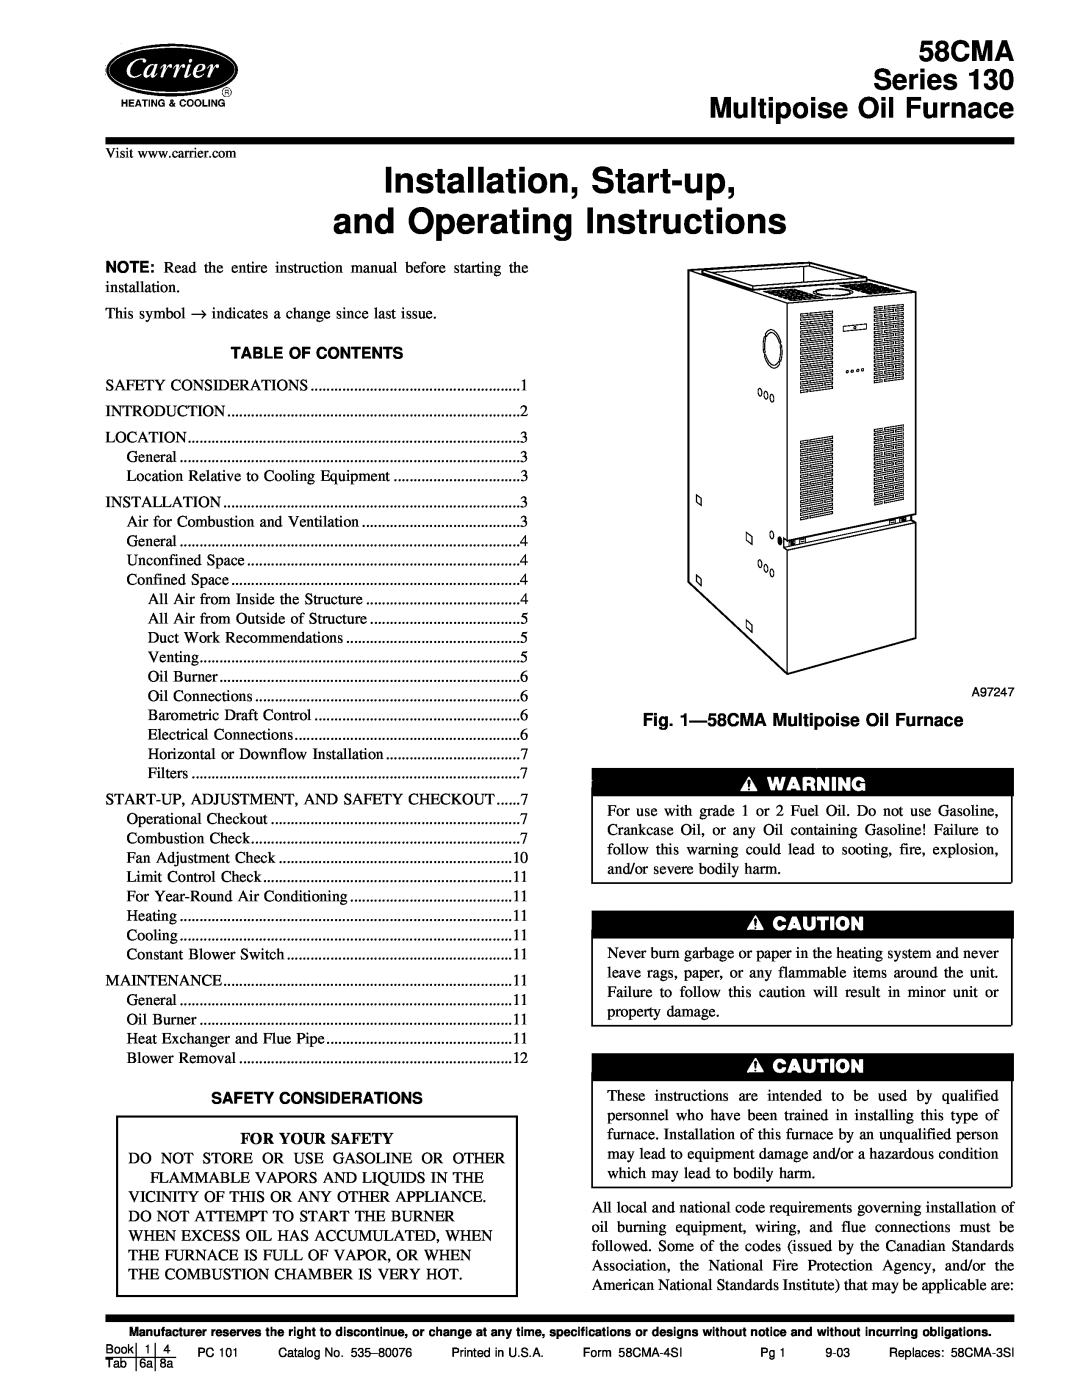 Carrier instruction manual 58CMAMultipoise Oil Furnace, Table Of Contents, Safety Considerations, For Your Safety 